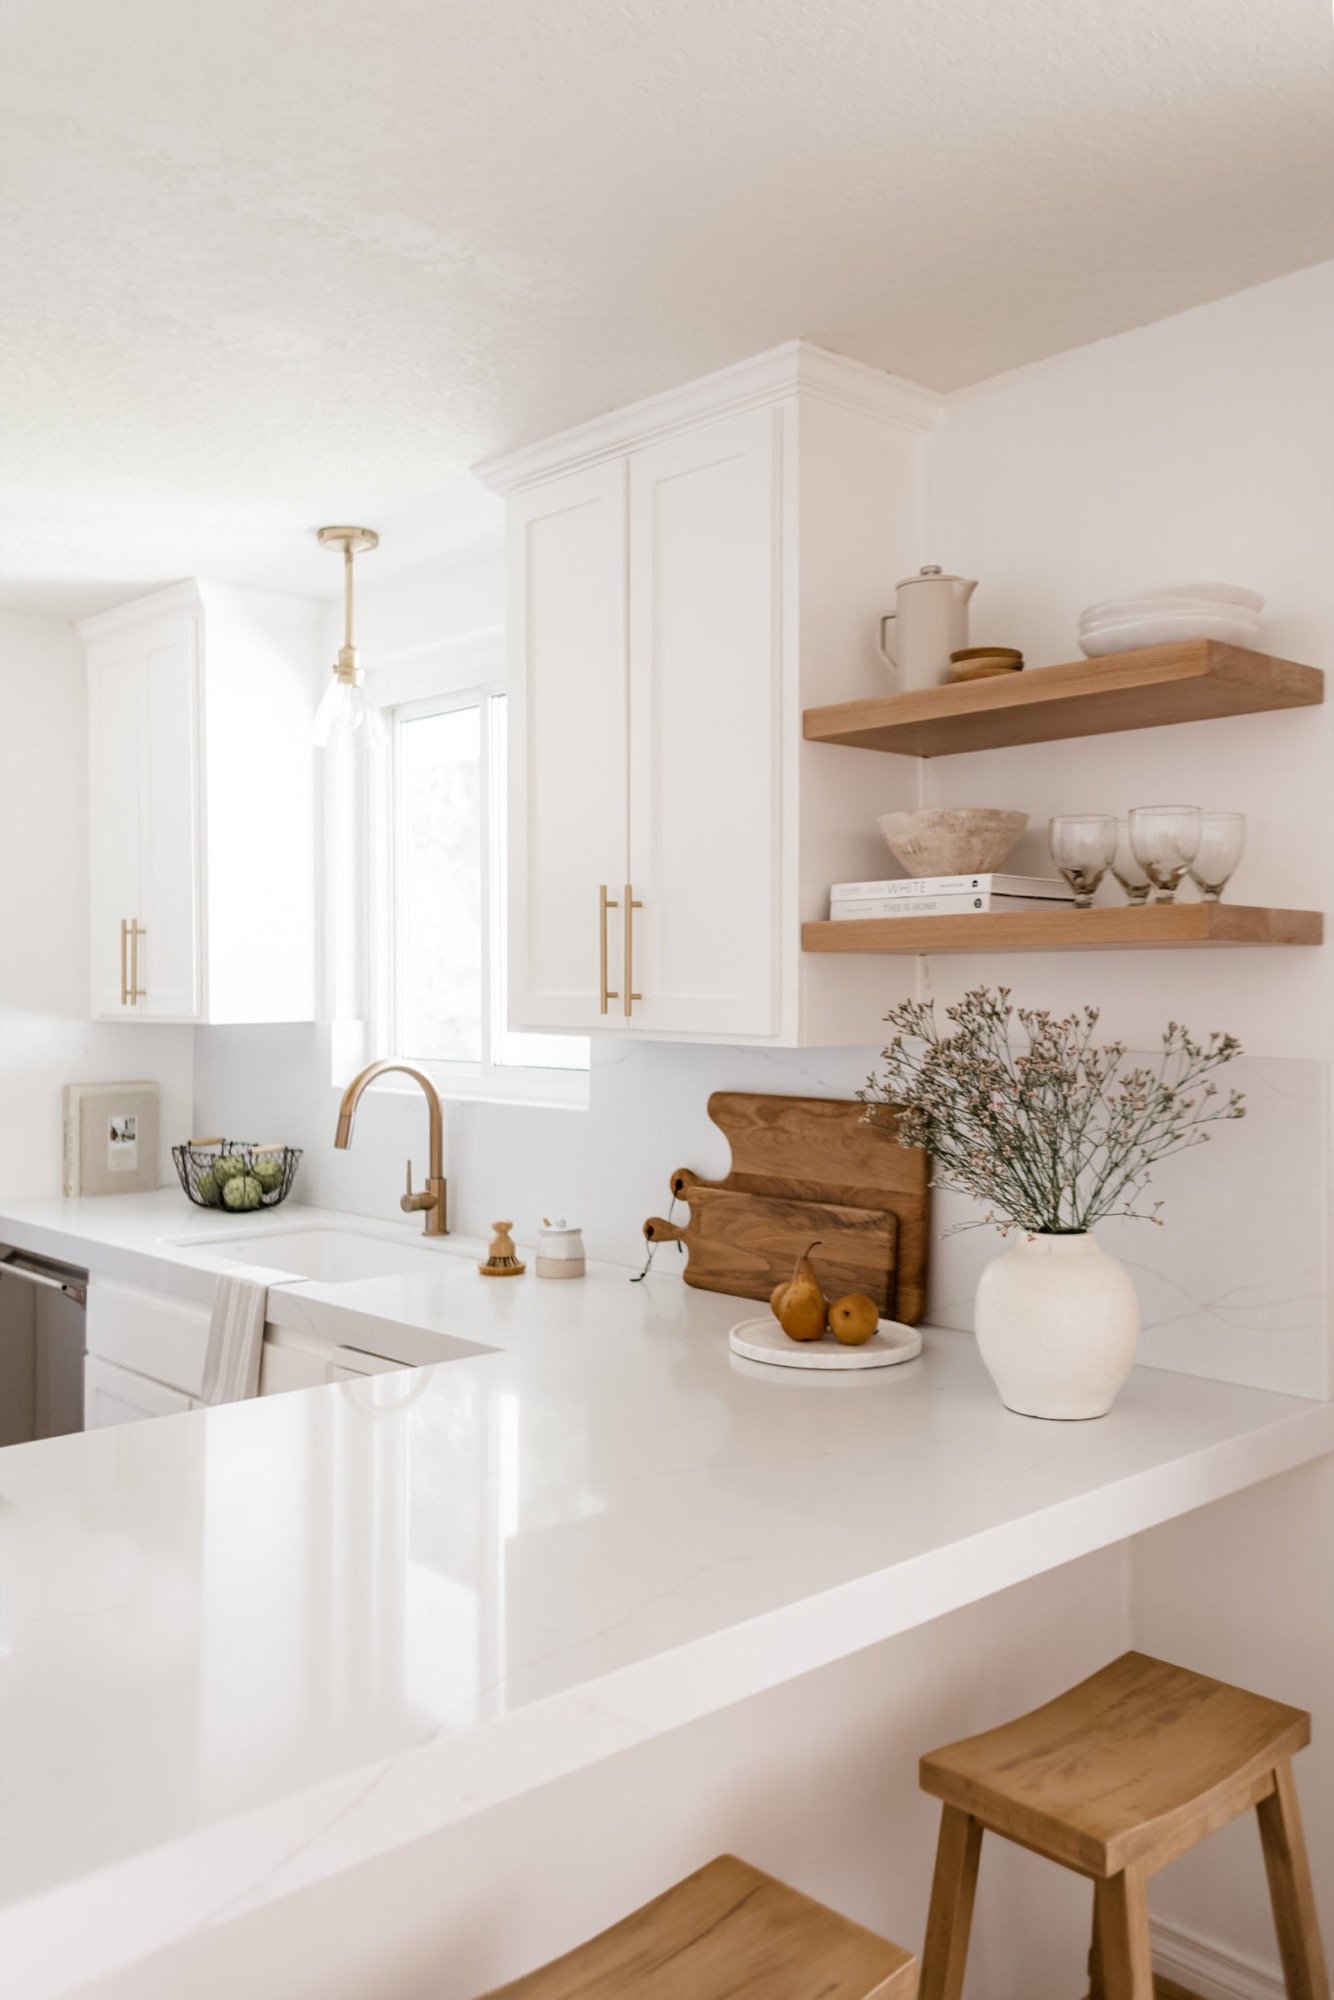 How to Decorate Your Kitchen Countertops Like a Pro: My 10 Tips